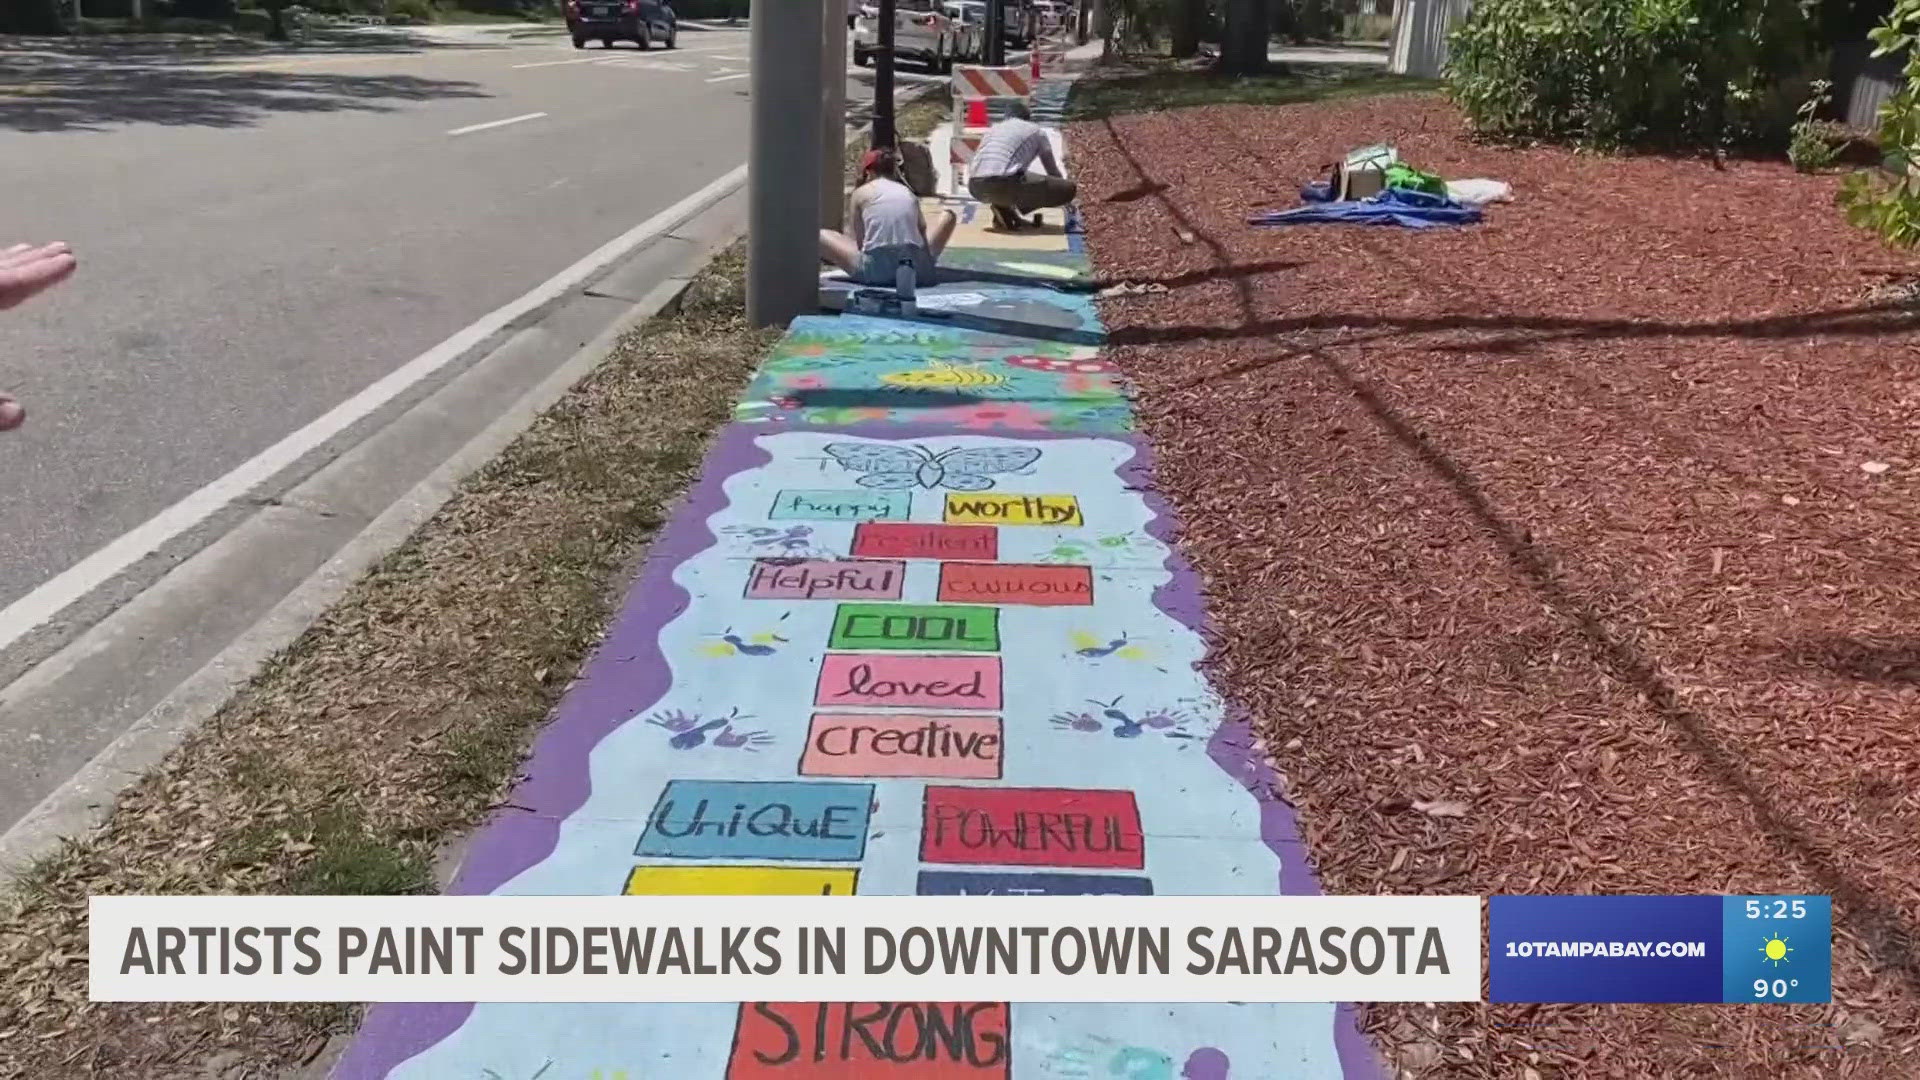 More than 200 artists from 12 different countries are painting sidewalk panels in the Burns historic district downtown.